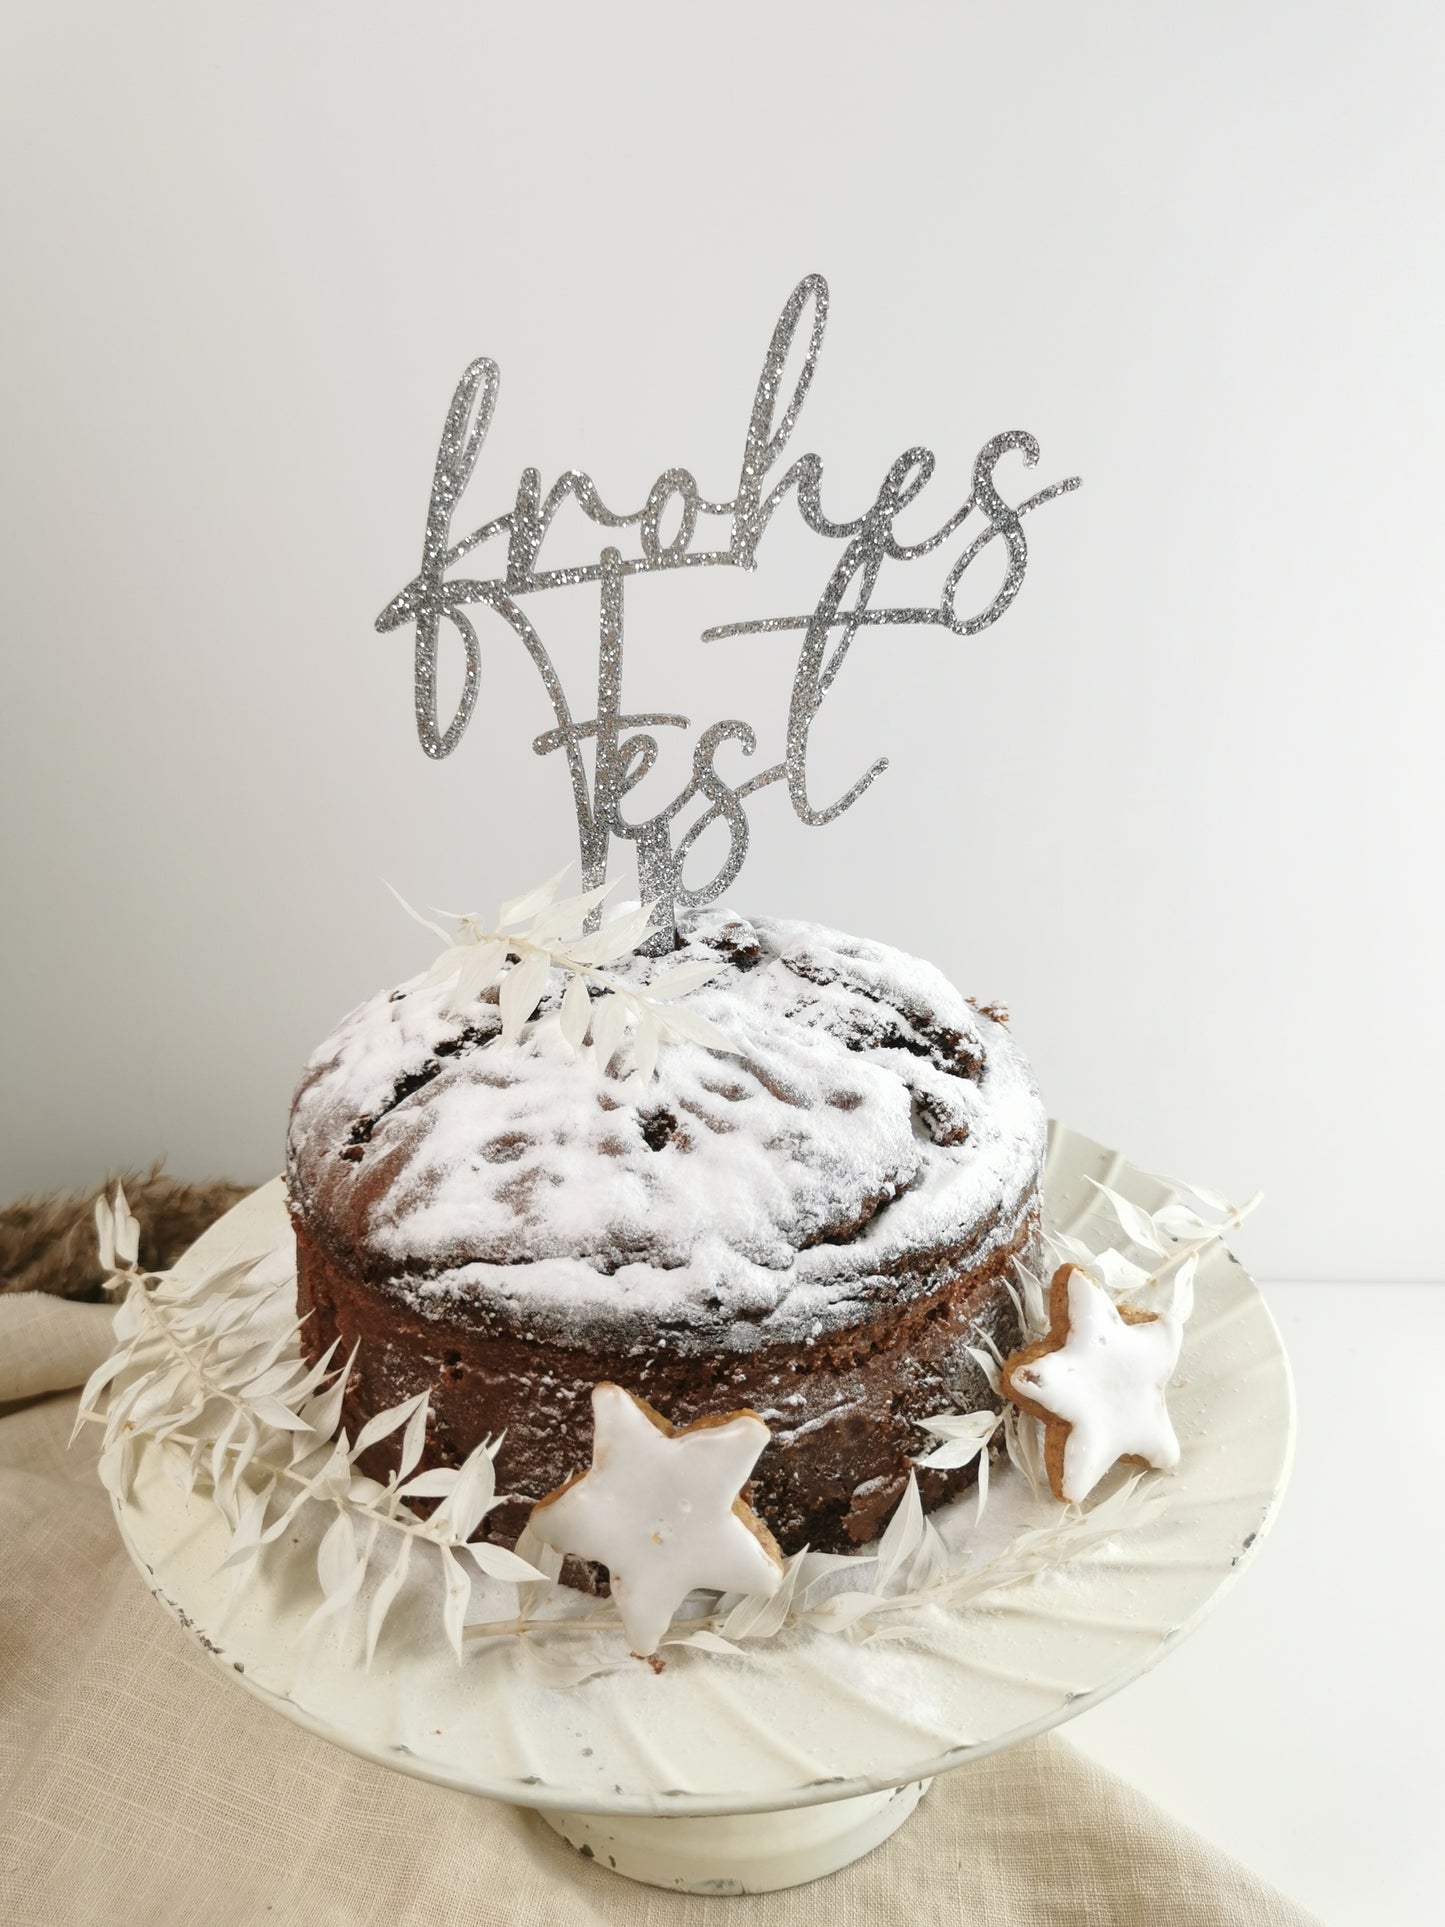 Caketopper Frohes Fest